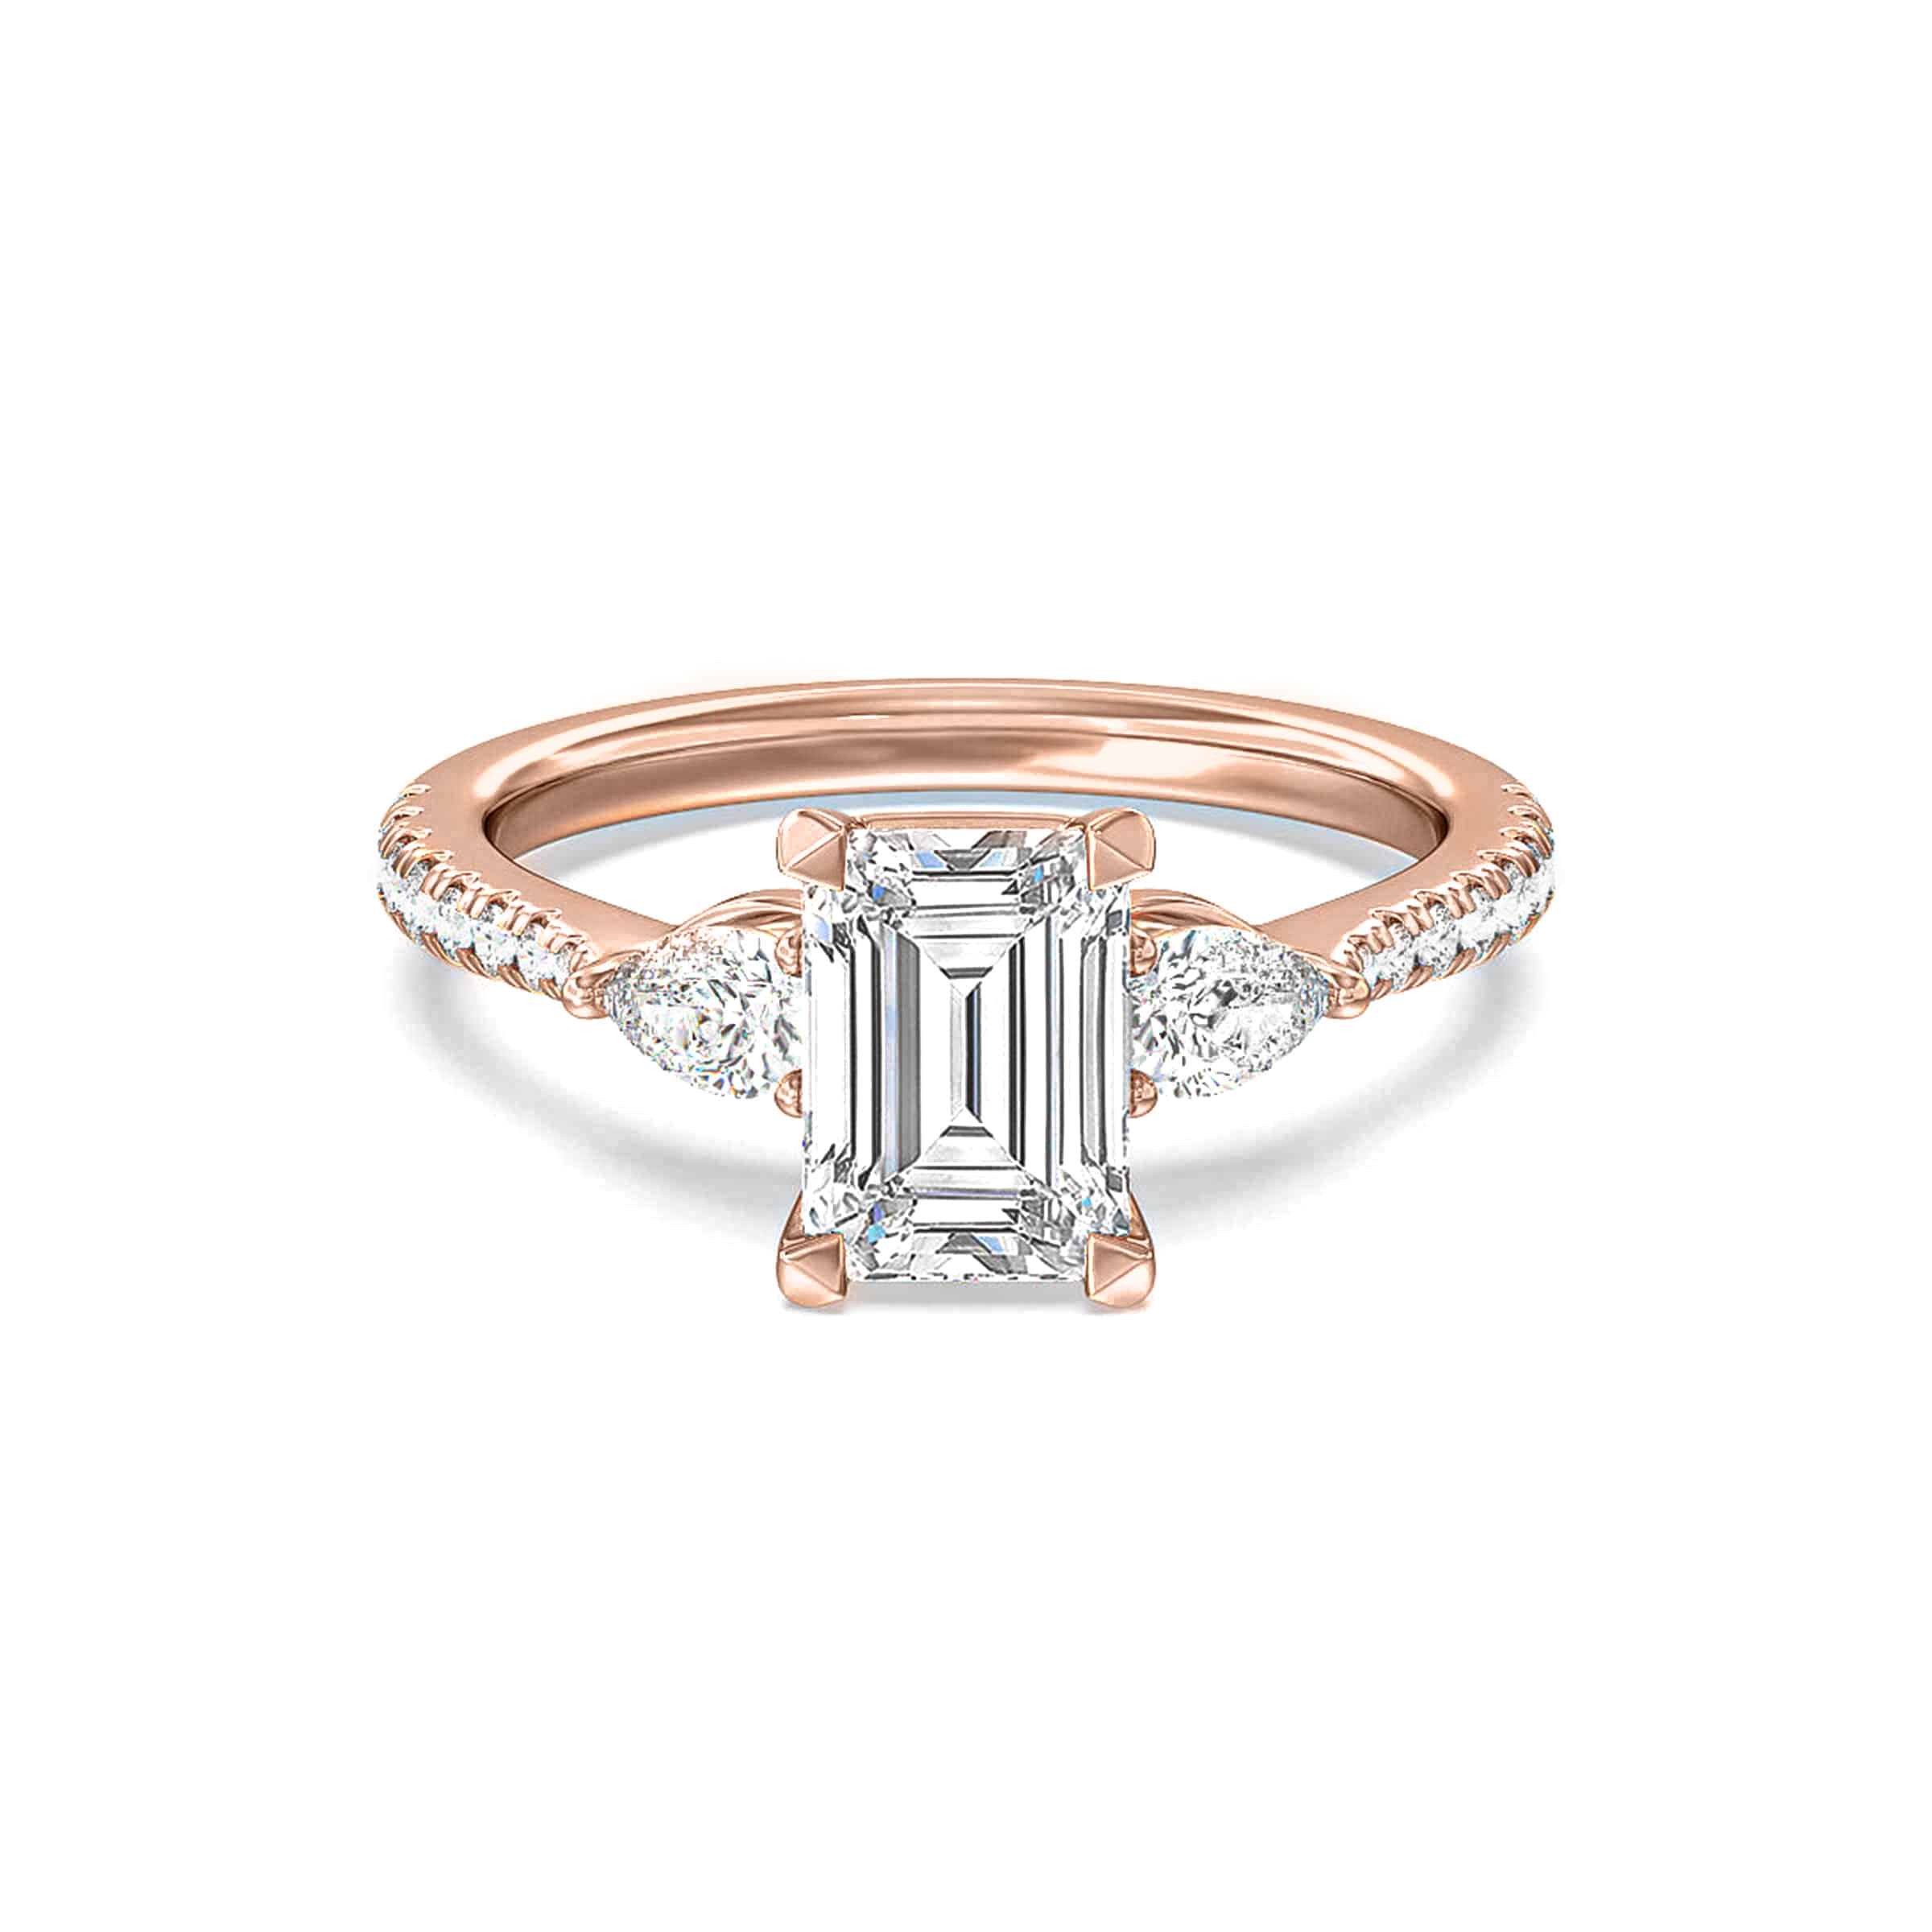 Darry Ring three stone emerald cut engagement ring rose gold